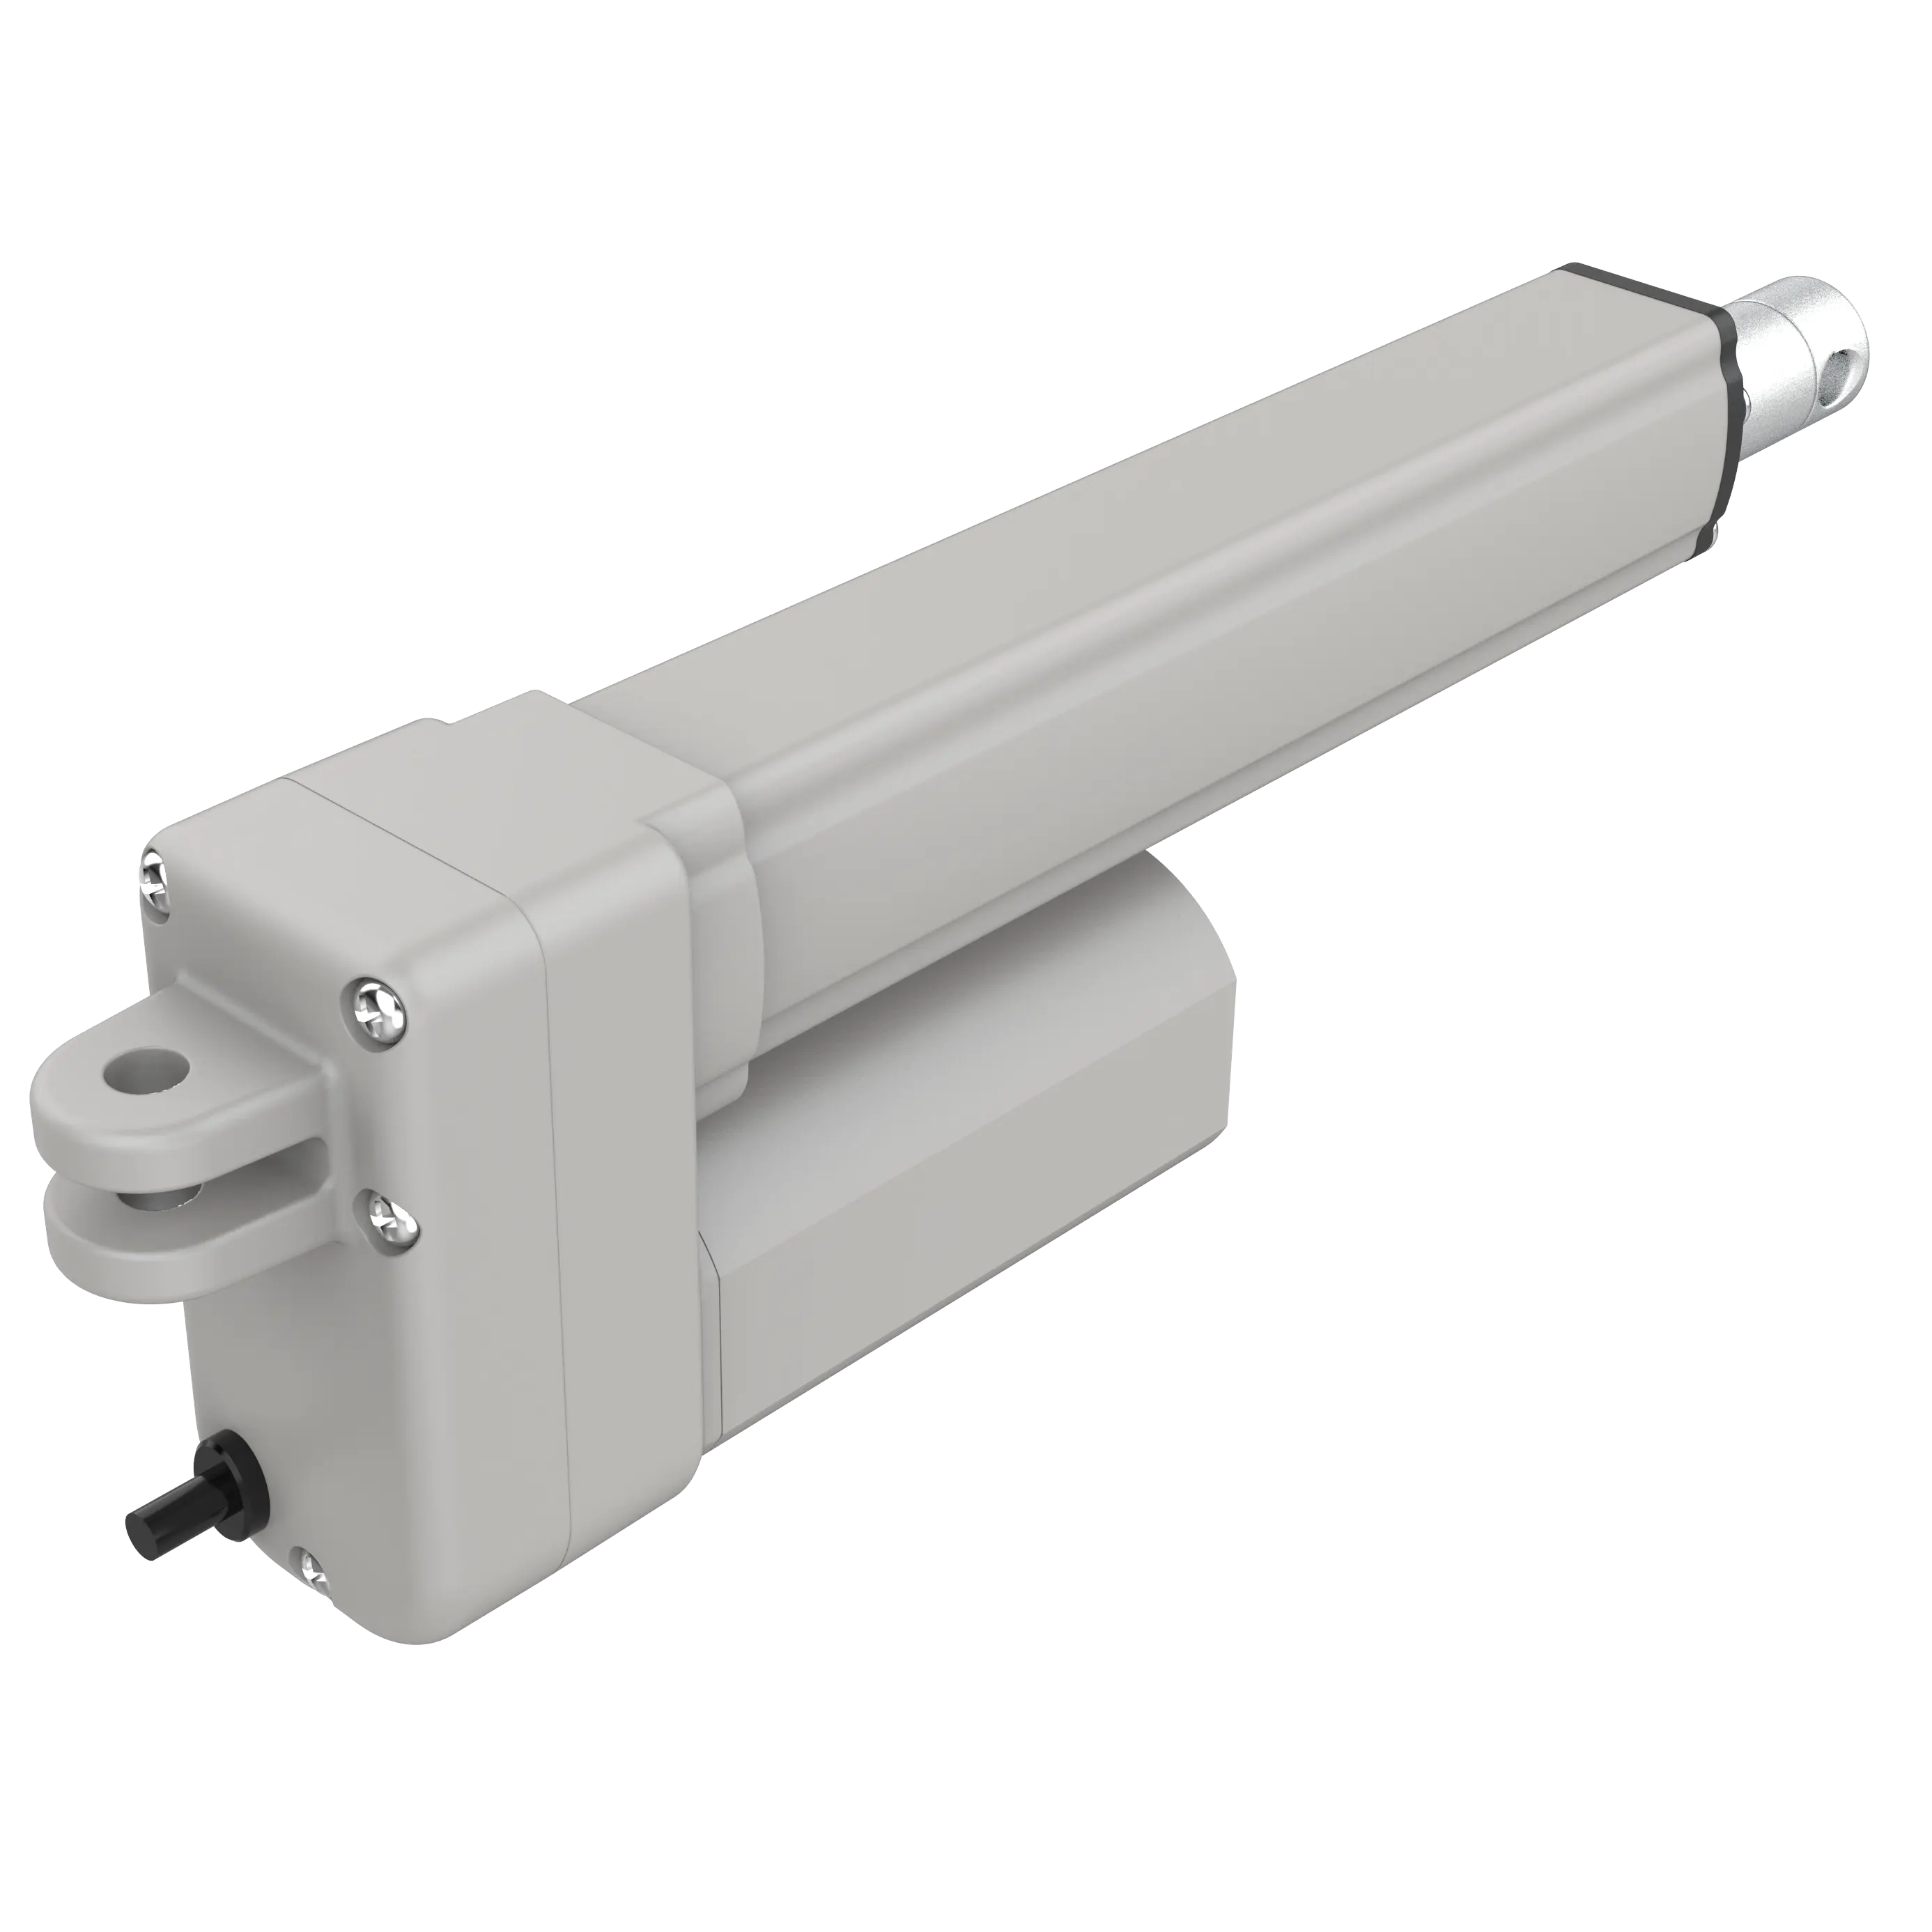 12 volt 12inch stroke 1000kg 1000N force electric linear actuator with cheap price